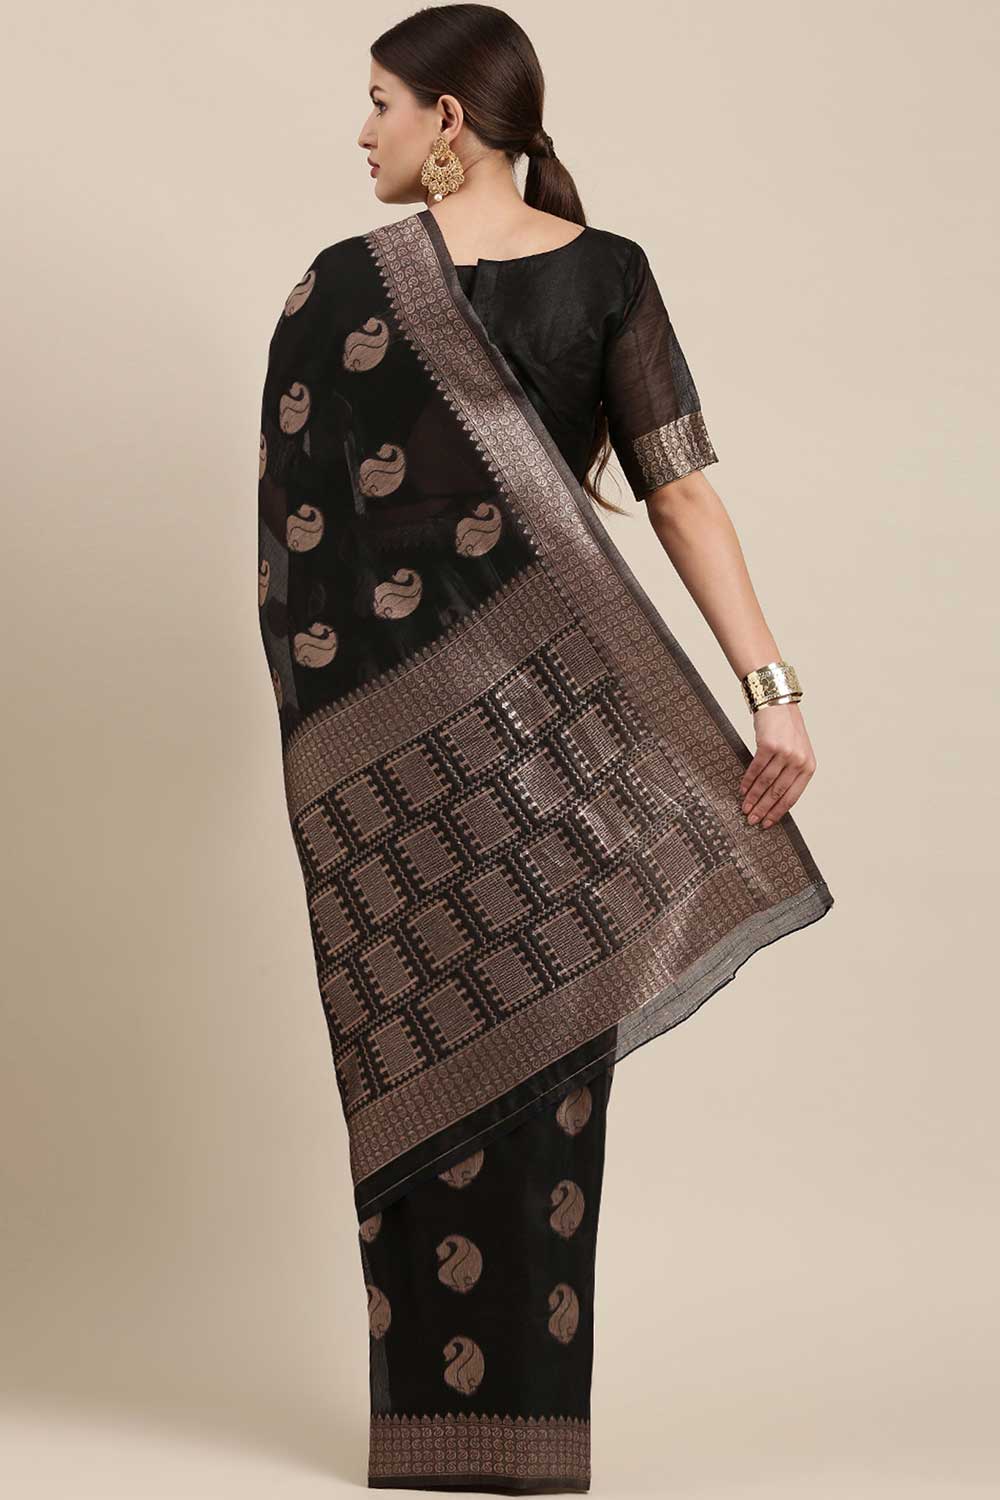 Shop Anji Black Bagh Blended Linen One Minute Saree at best offer at our  Store - One Minute Saree